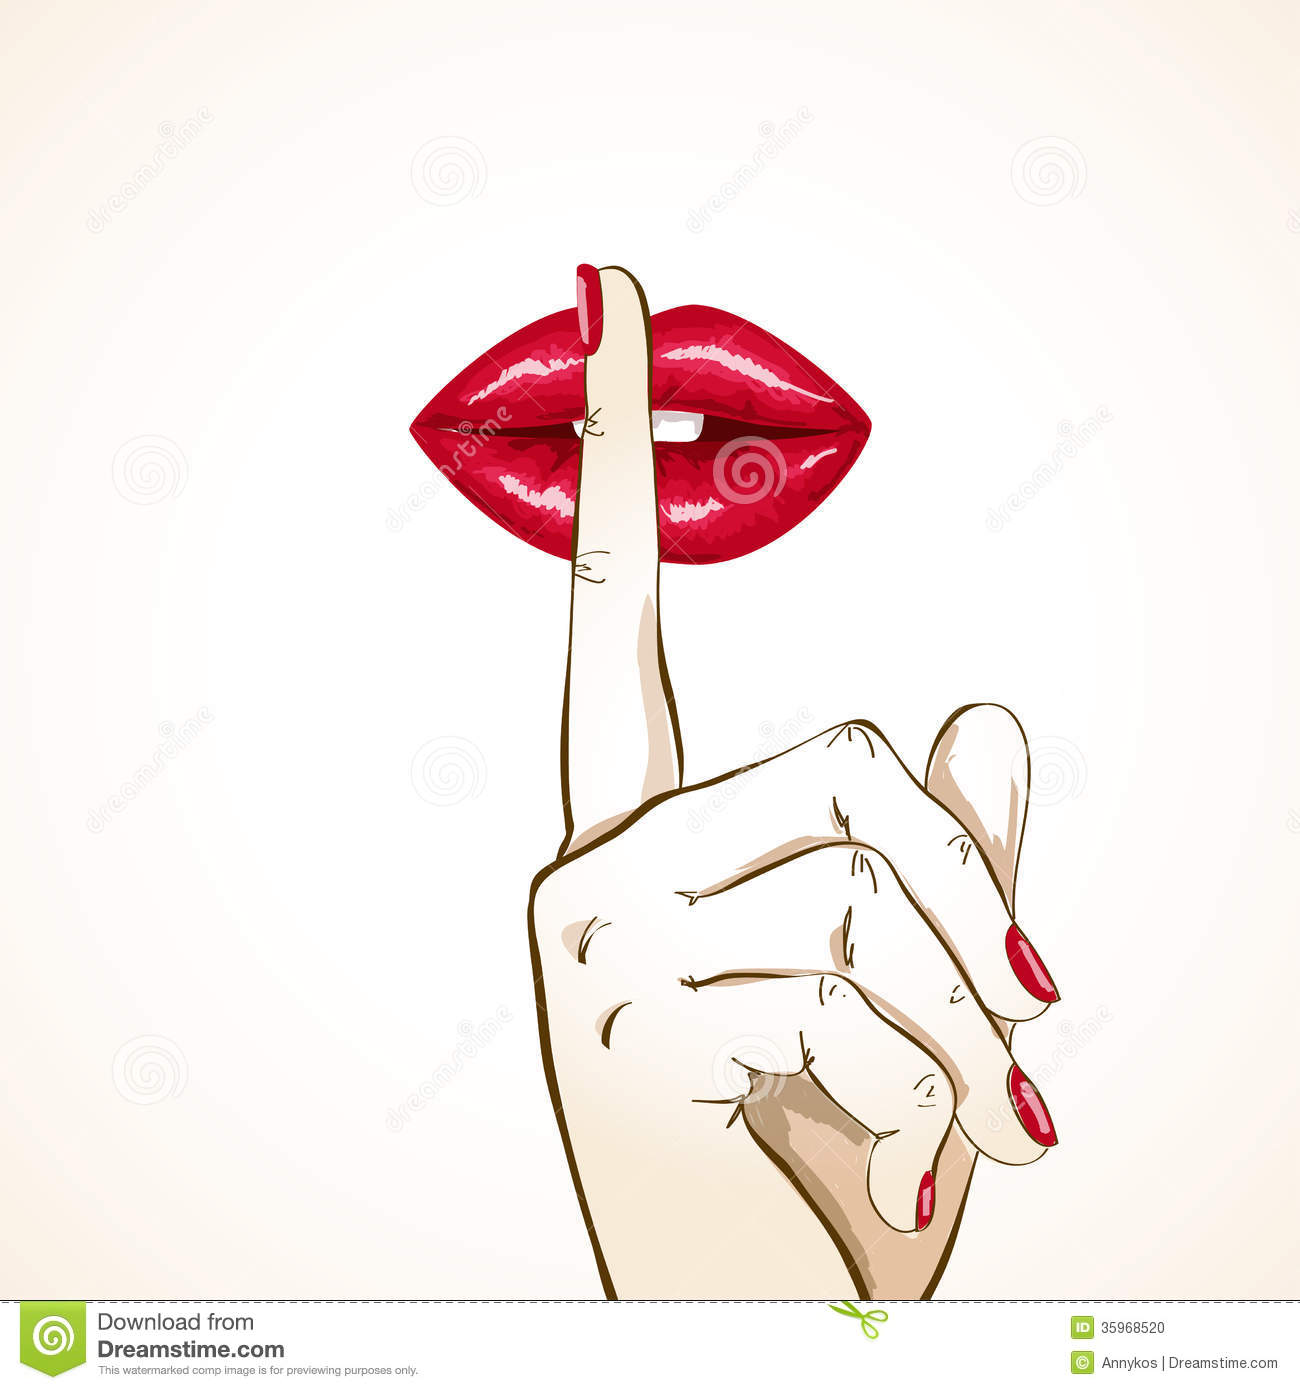 Illustration Of Woman Lips With Finger In Shh Sign Stock Photo   Image